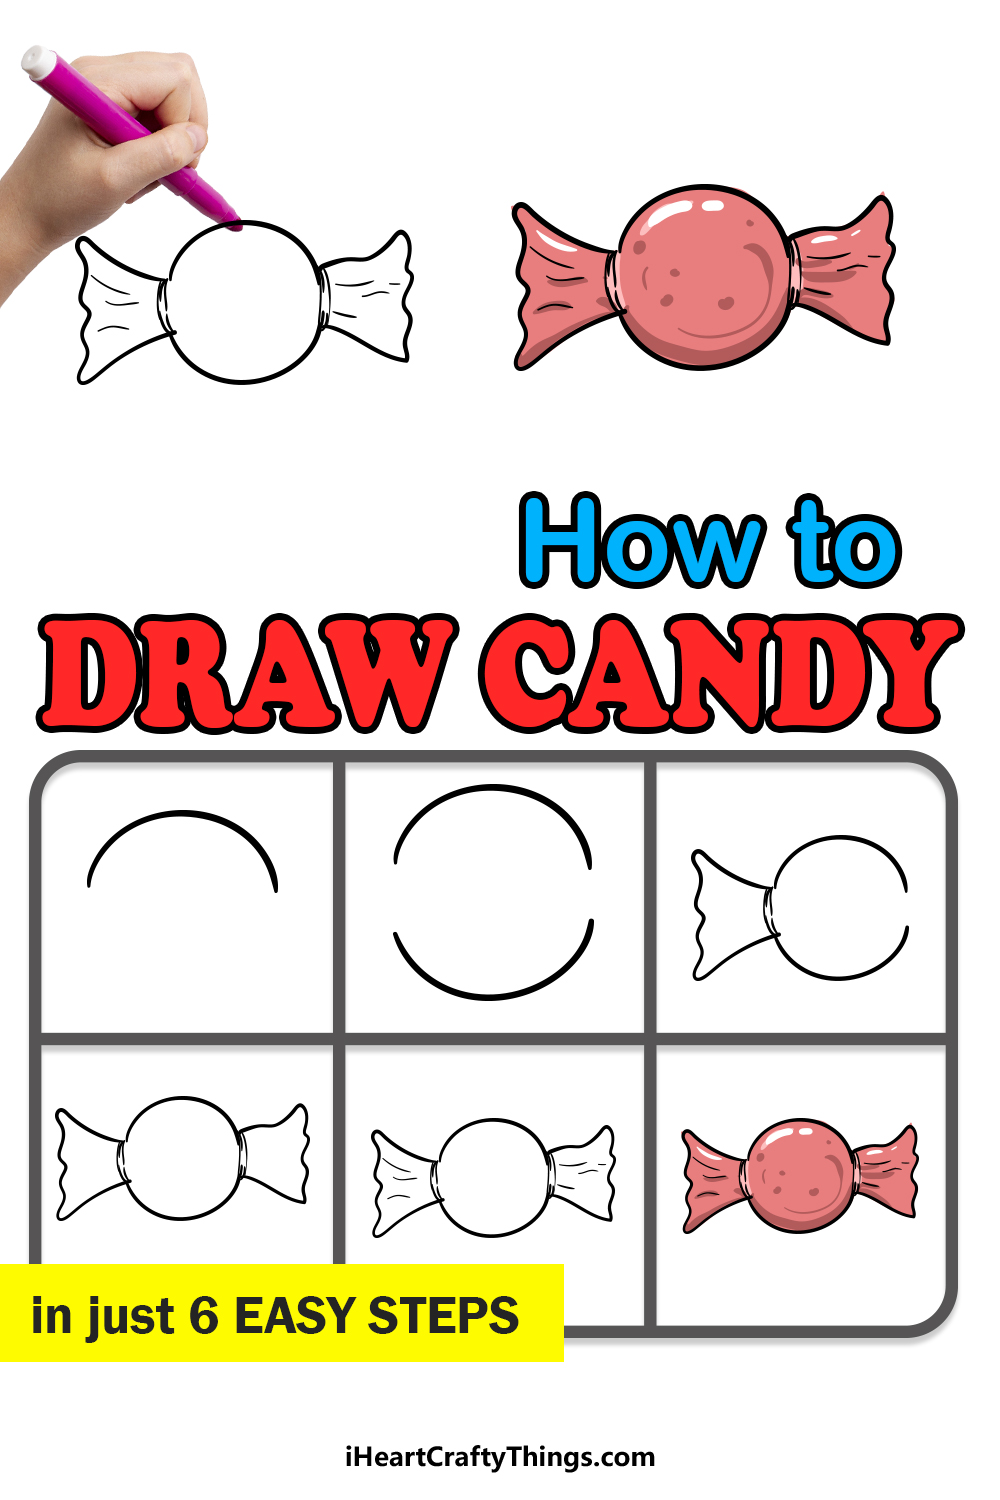 how to draw candy in 6 easy steps